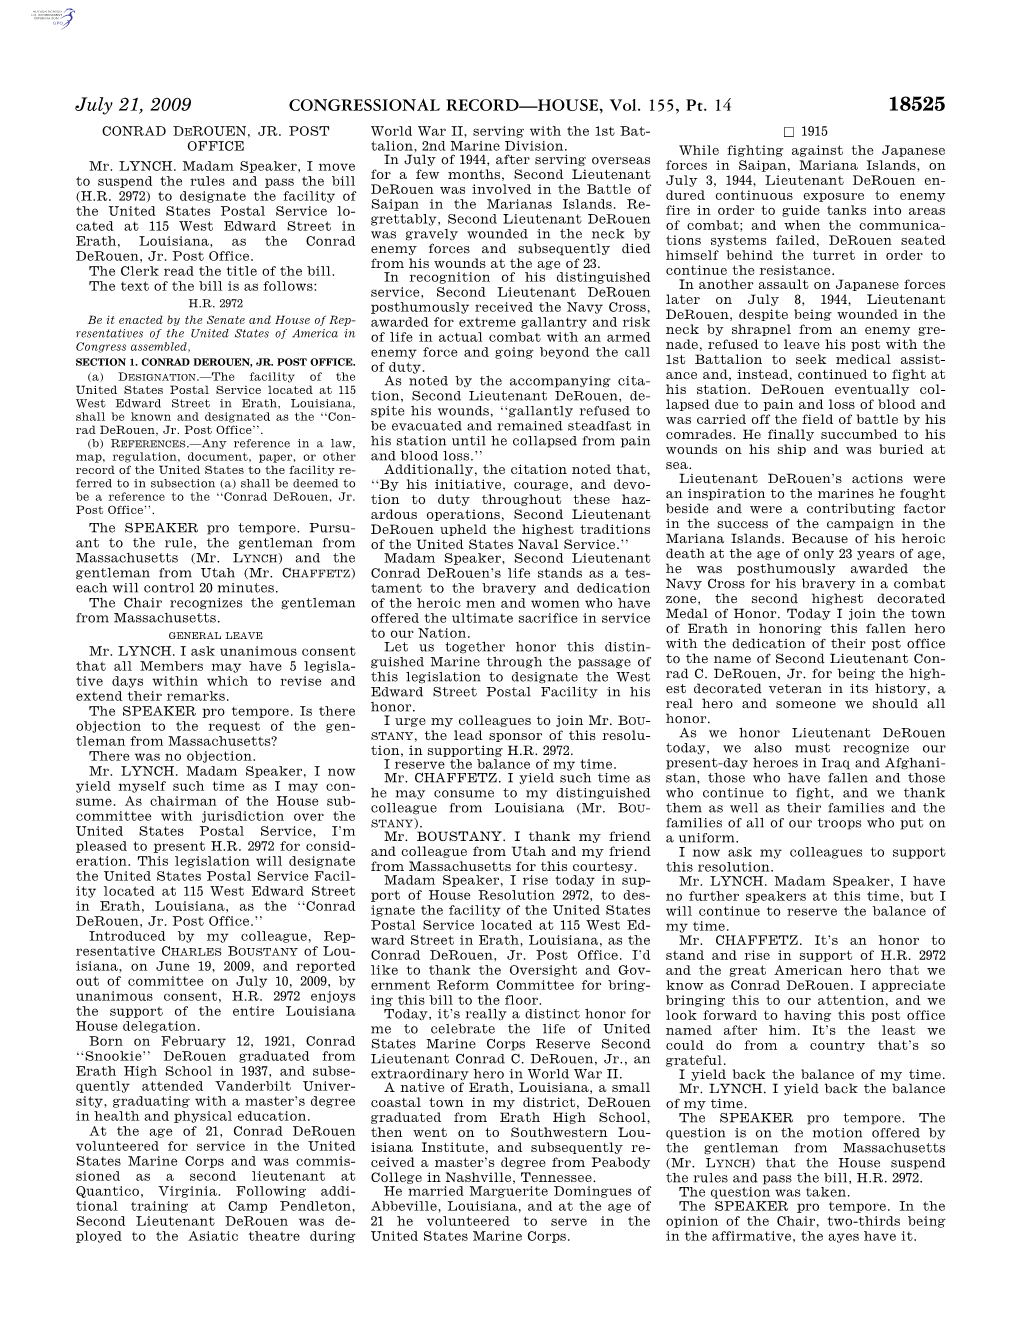 CONGRESSIONAL RECORD—HOUSE, Vol. 155, Pt. 14 July 21, 2009 Mr